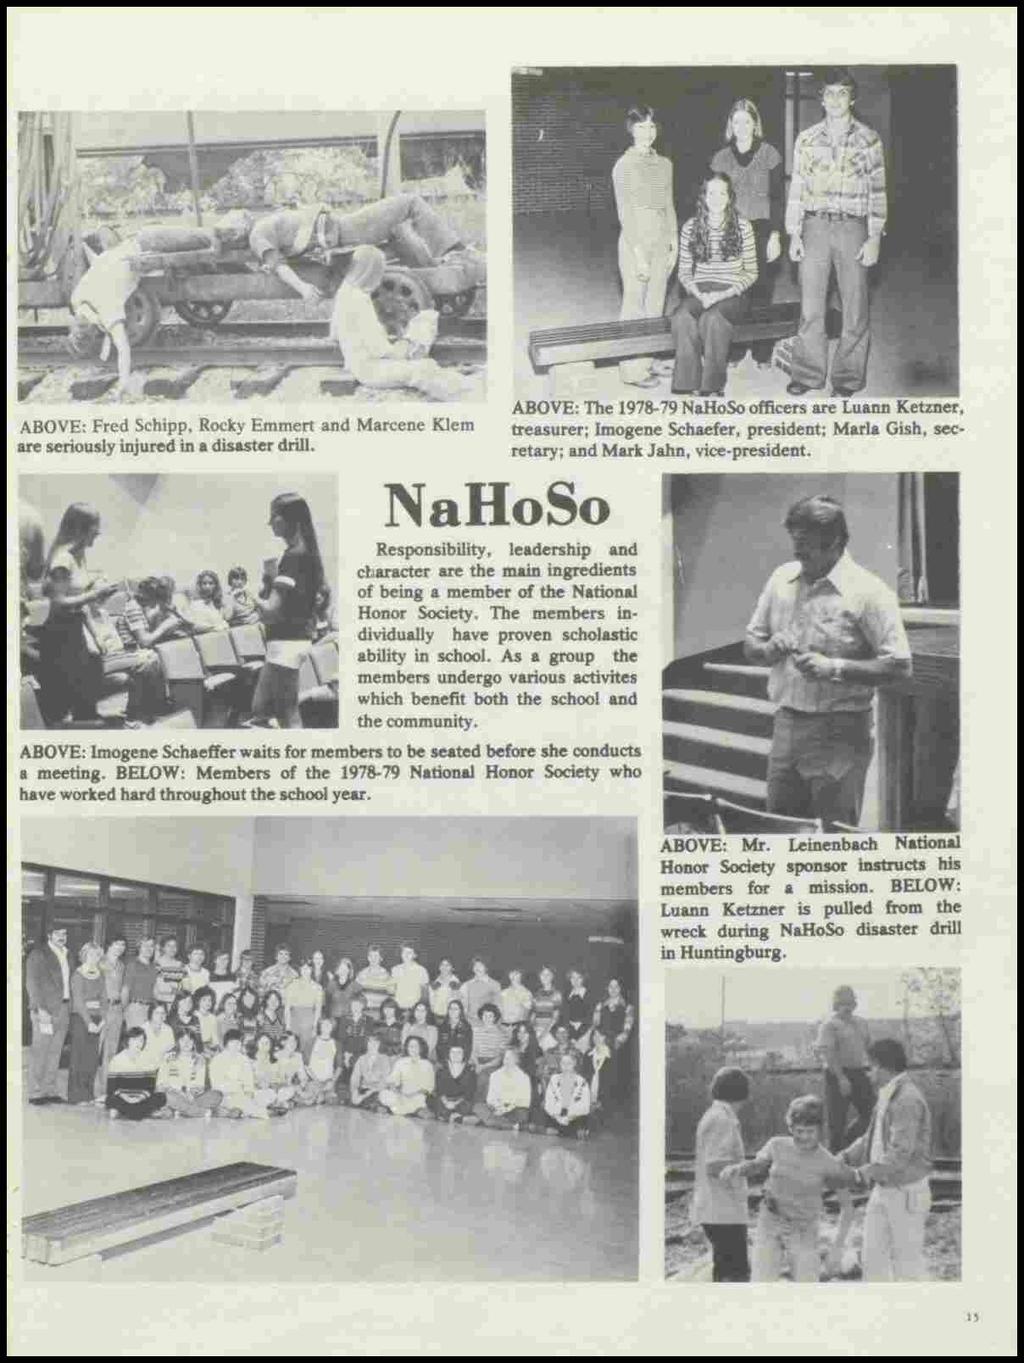 NaHoSo Responsibility, leadership and character are the main ingredients of being a member of the National Honor Society. The members individually have proven scholastic ability in school.